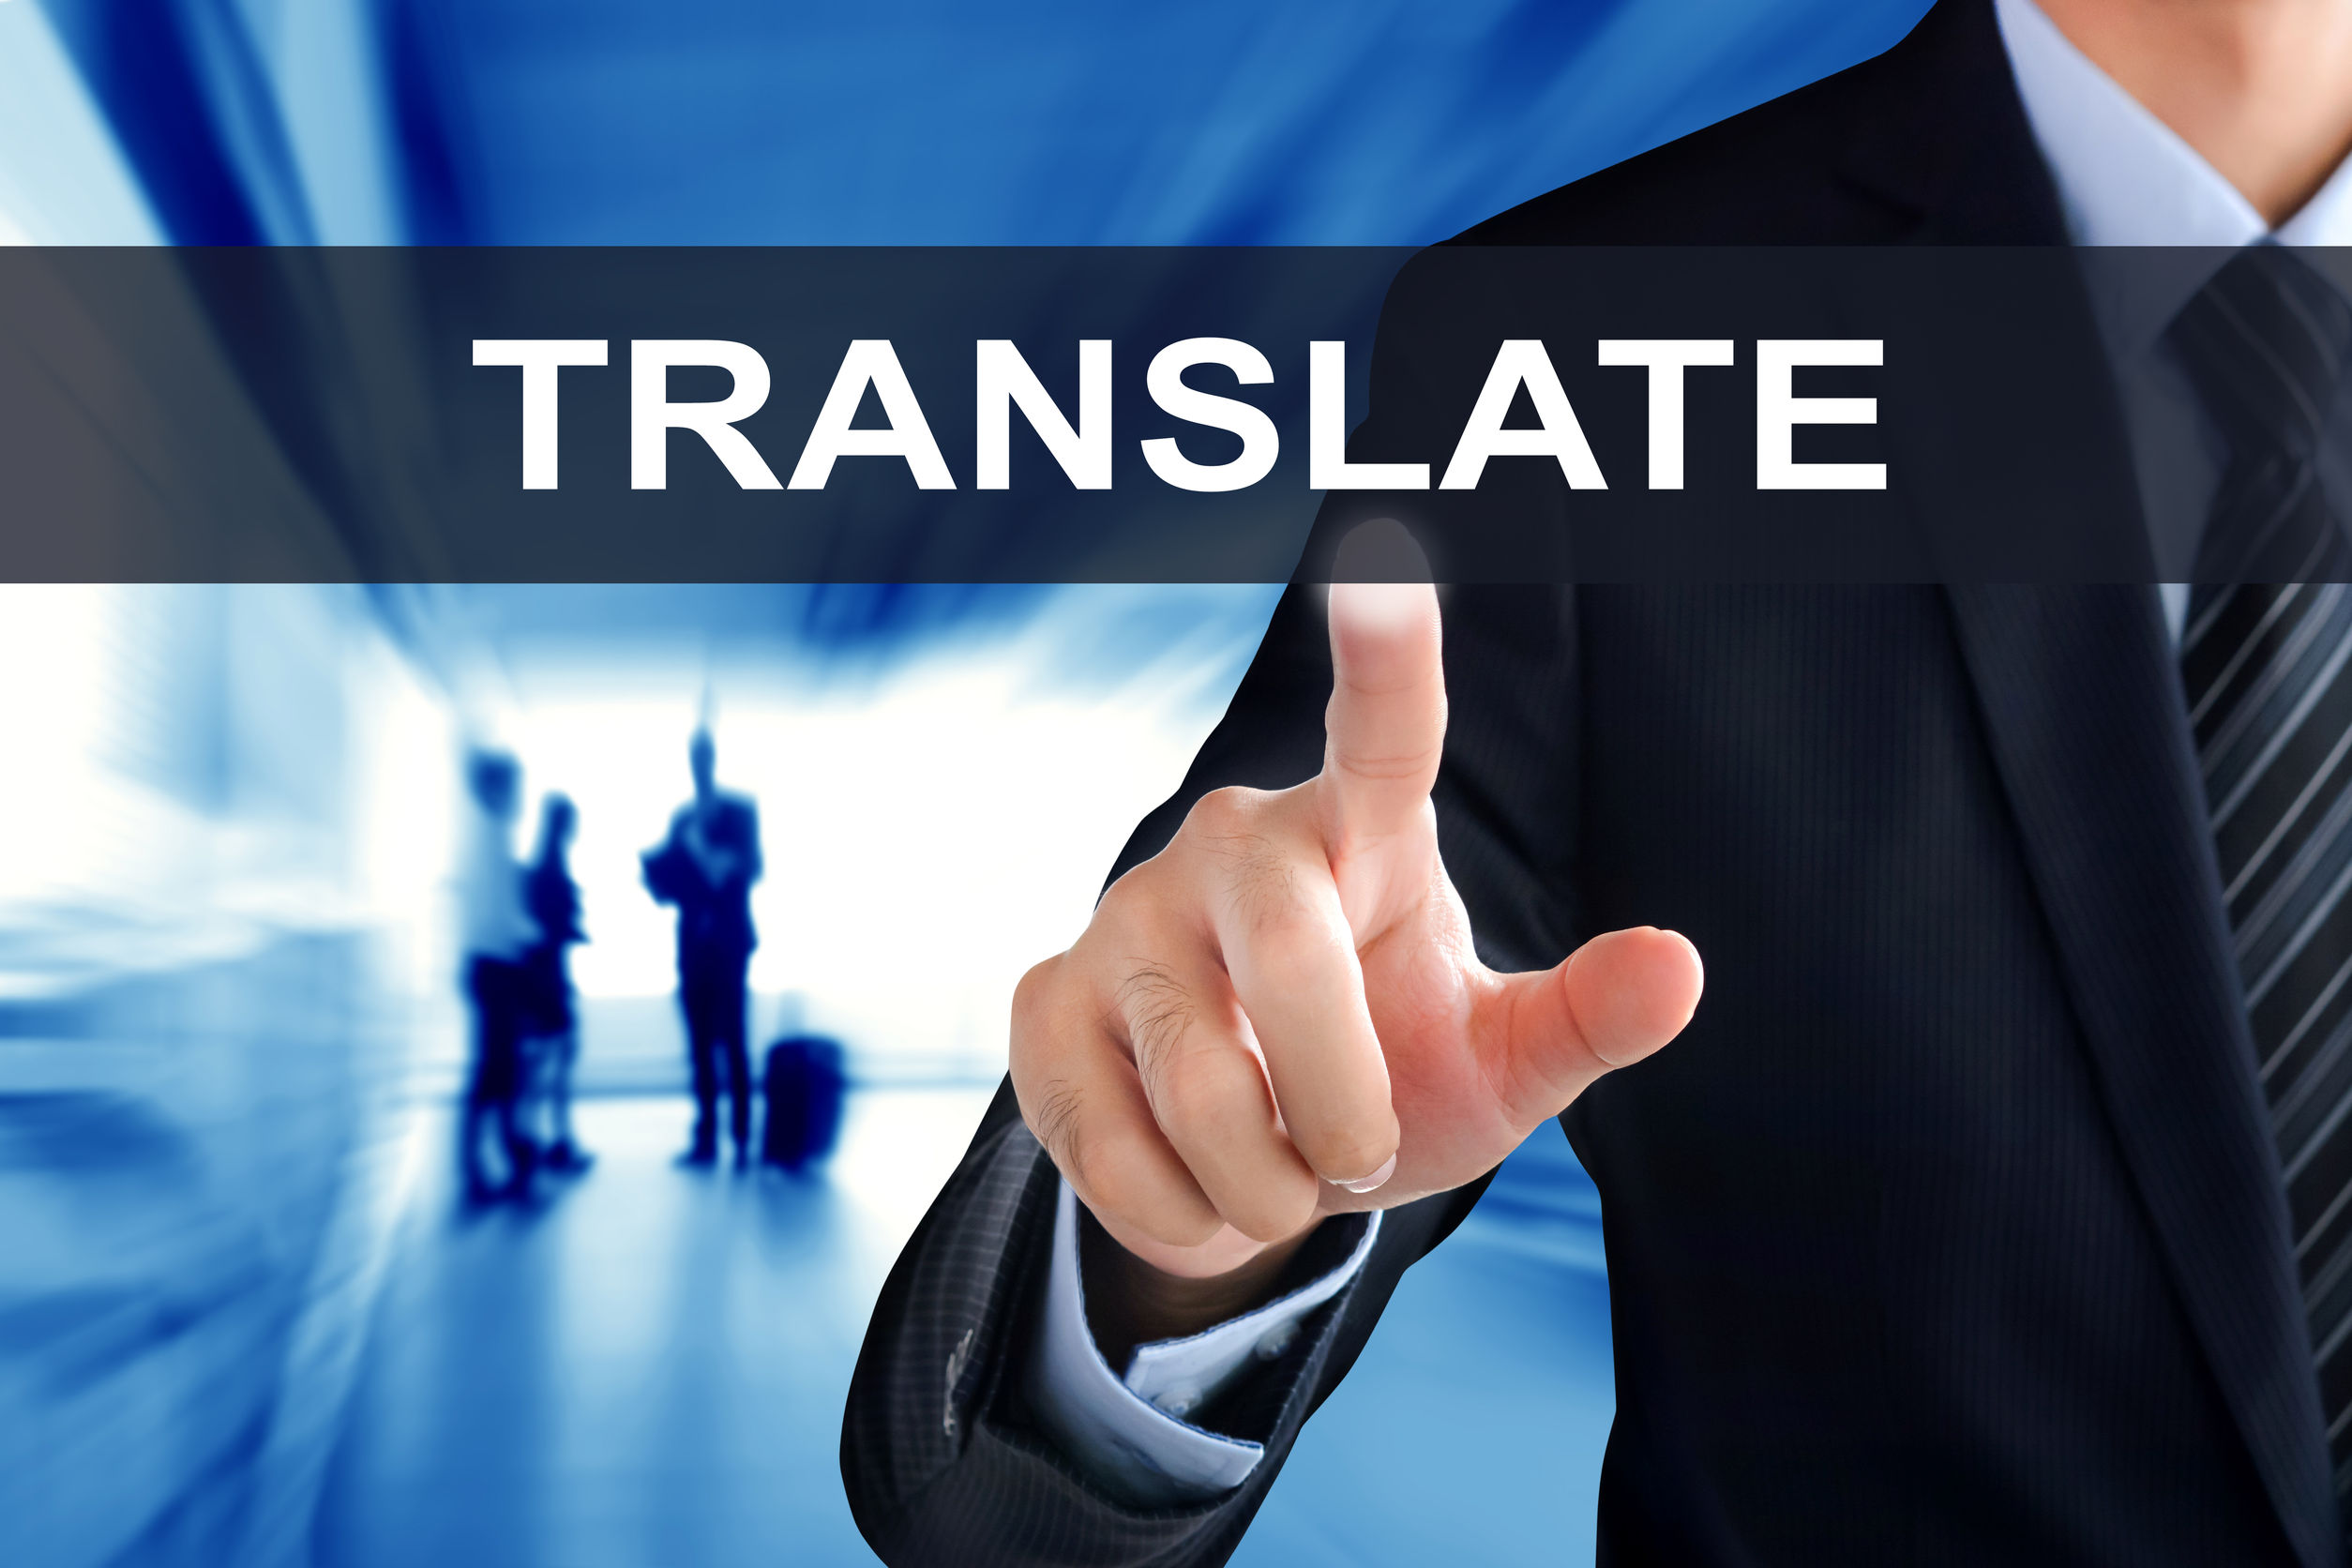 What Qualities To Look For in a Translation Company?